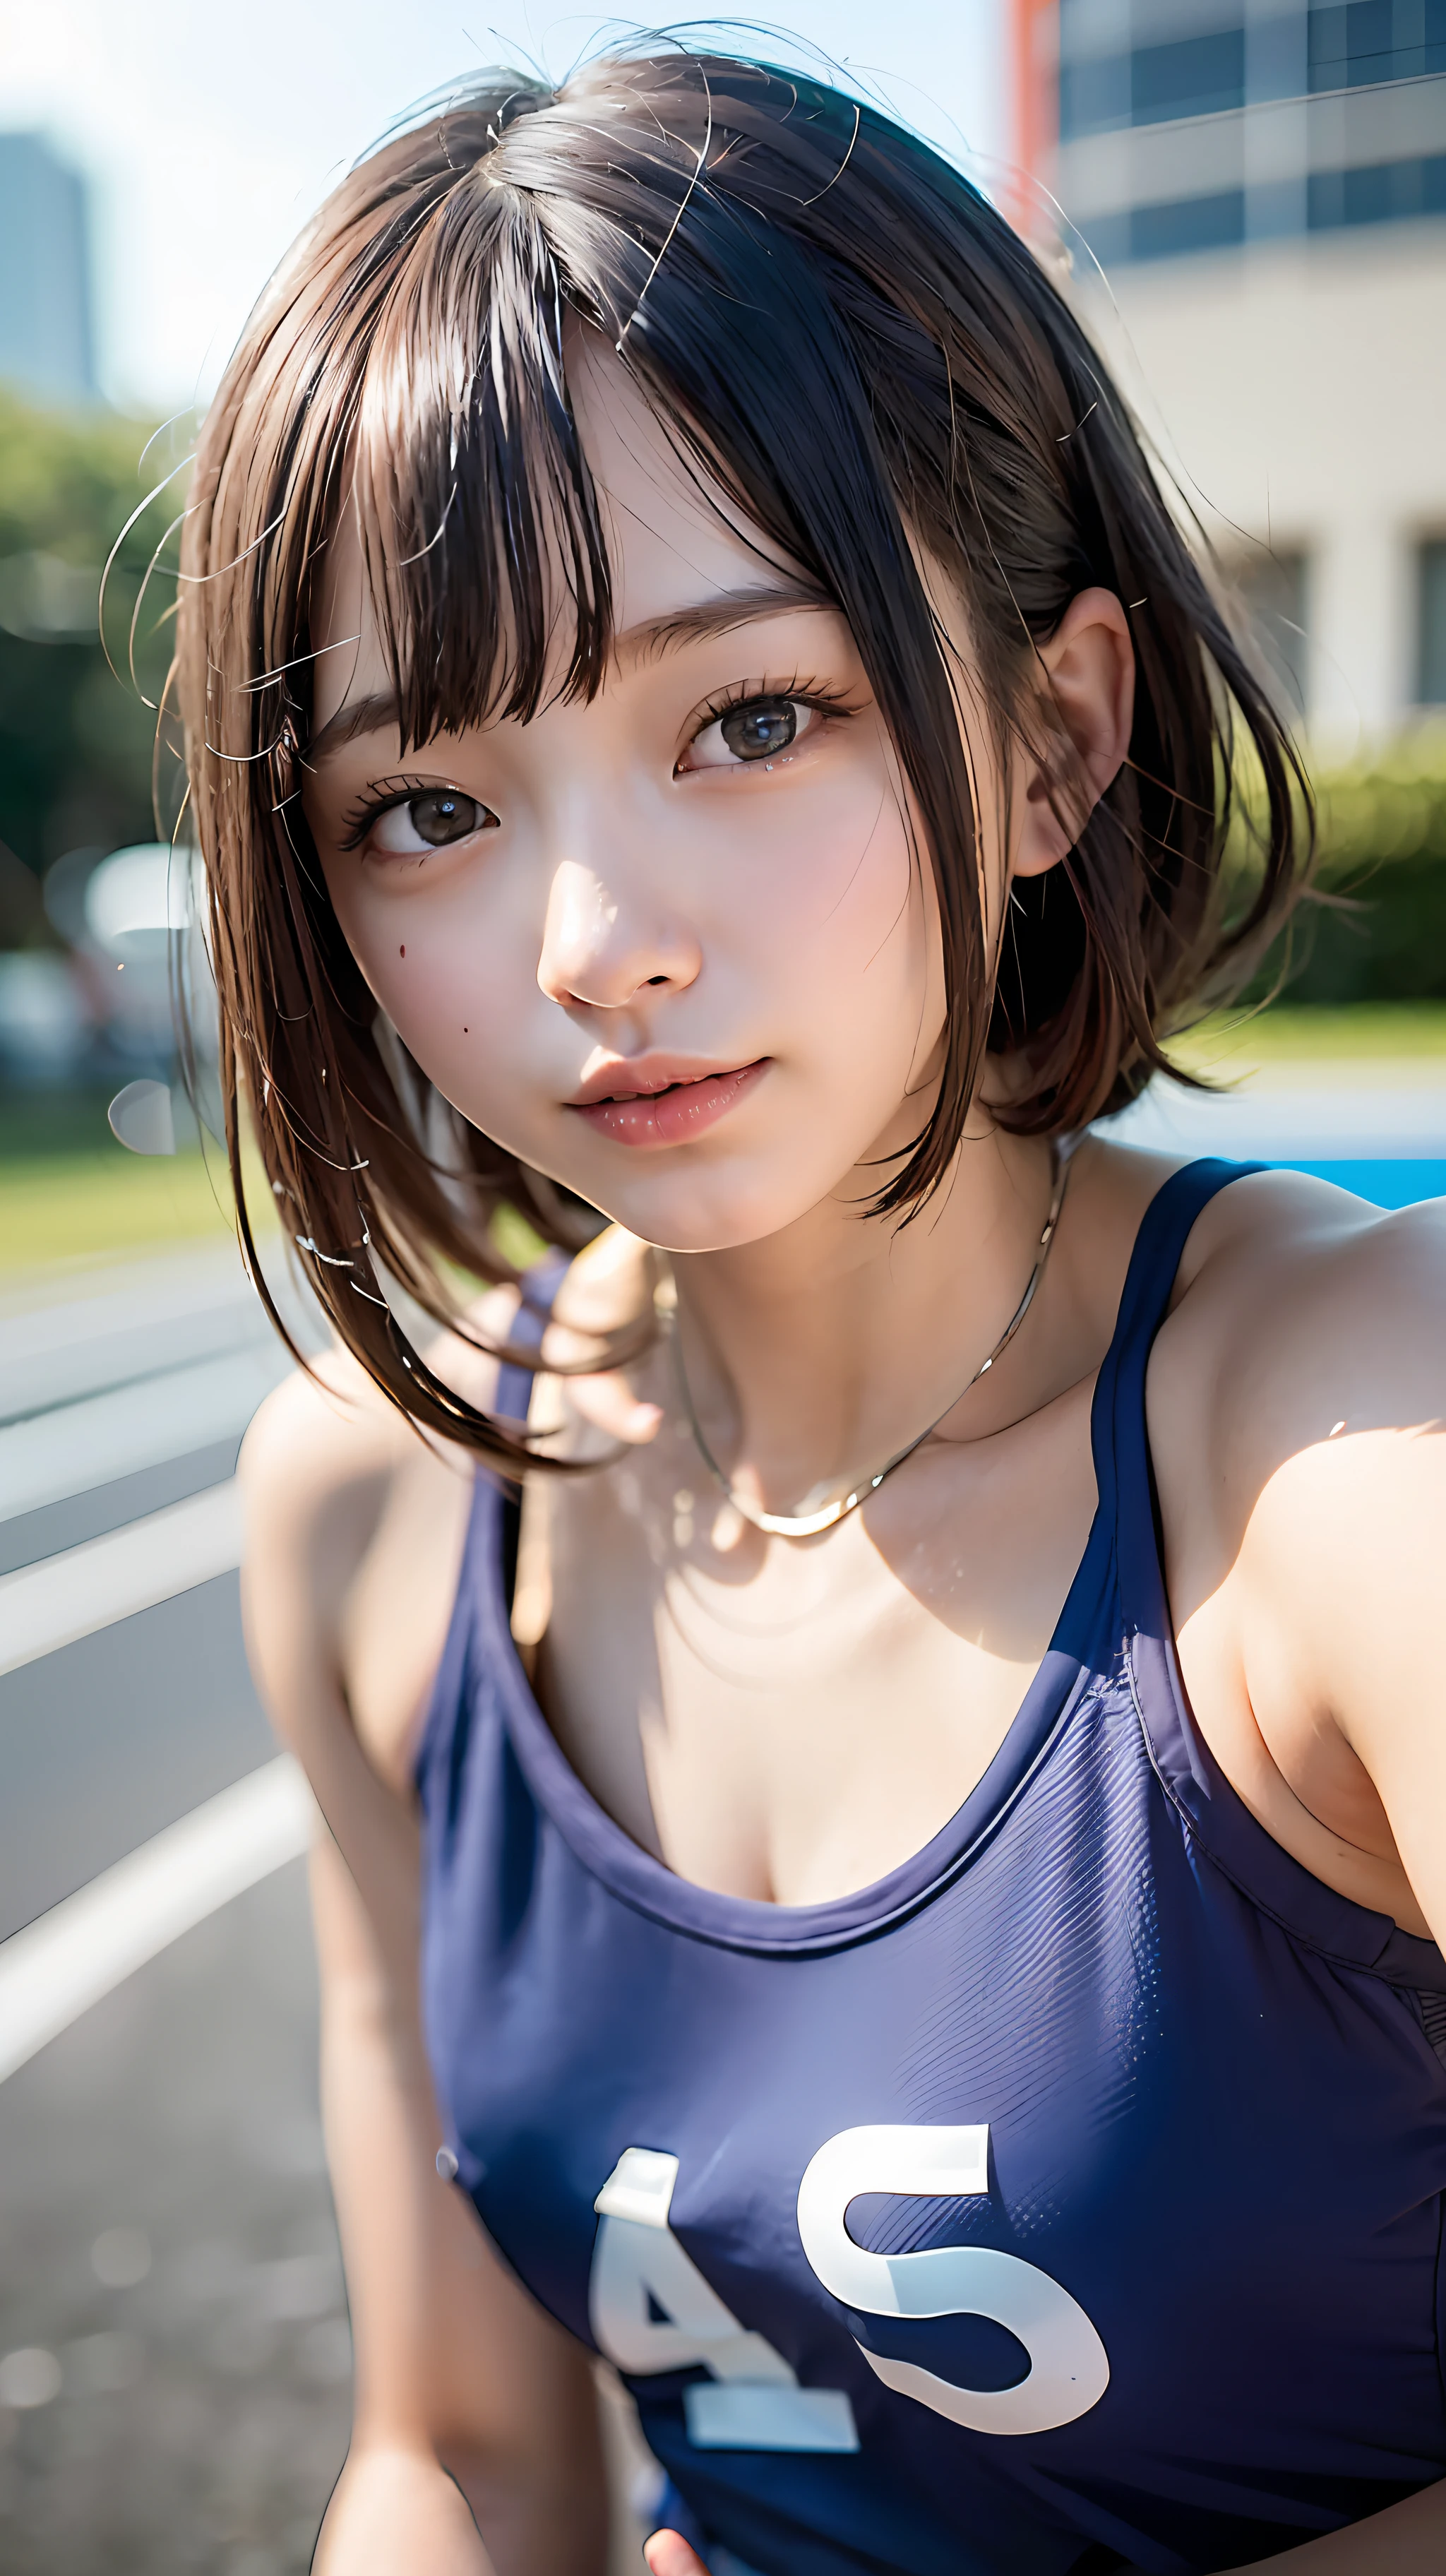 Before the start of track and field sprinting、（Blue uniform for athletics）、{Exposed tank top、Wearing high-leg bloomers}、（abdomen exposure）、（Wrist exposed）、a closeup、cosplay foto、Anime Cosplay、middlebreasts、Raw photography, top-quality, hight resolution, (​masterpiece), (Photorealsitic:1.4), professional photograpy, sharp focus, nffsw, 8K resolution, intricate detailes,  depth of fields, extremely detailed CG Unity、8k wallpaper, front lit, girl with, （kawaii）、beautiful supermodel, A smile、Short bob hair、A slender、free pose、dynamic ungle